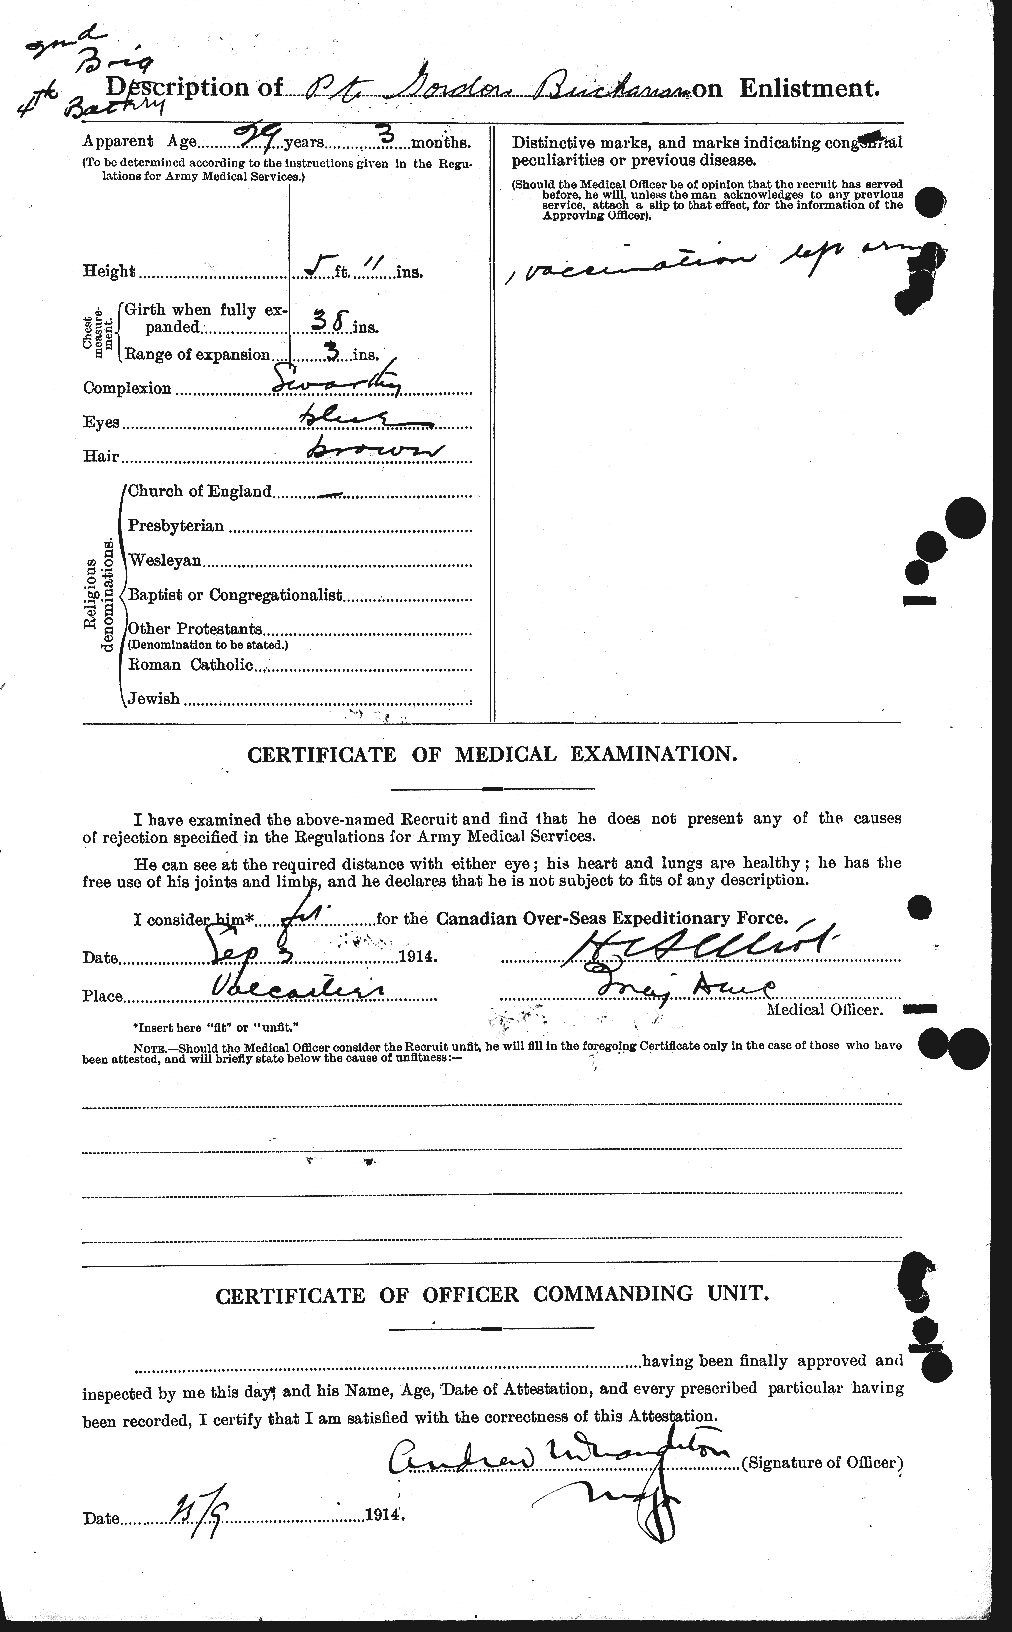 Personnel Records of the First World War - CEF 271487b